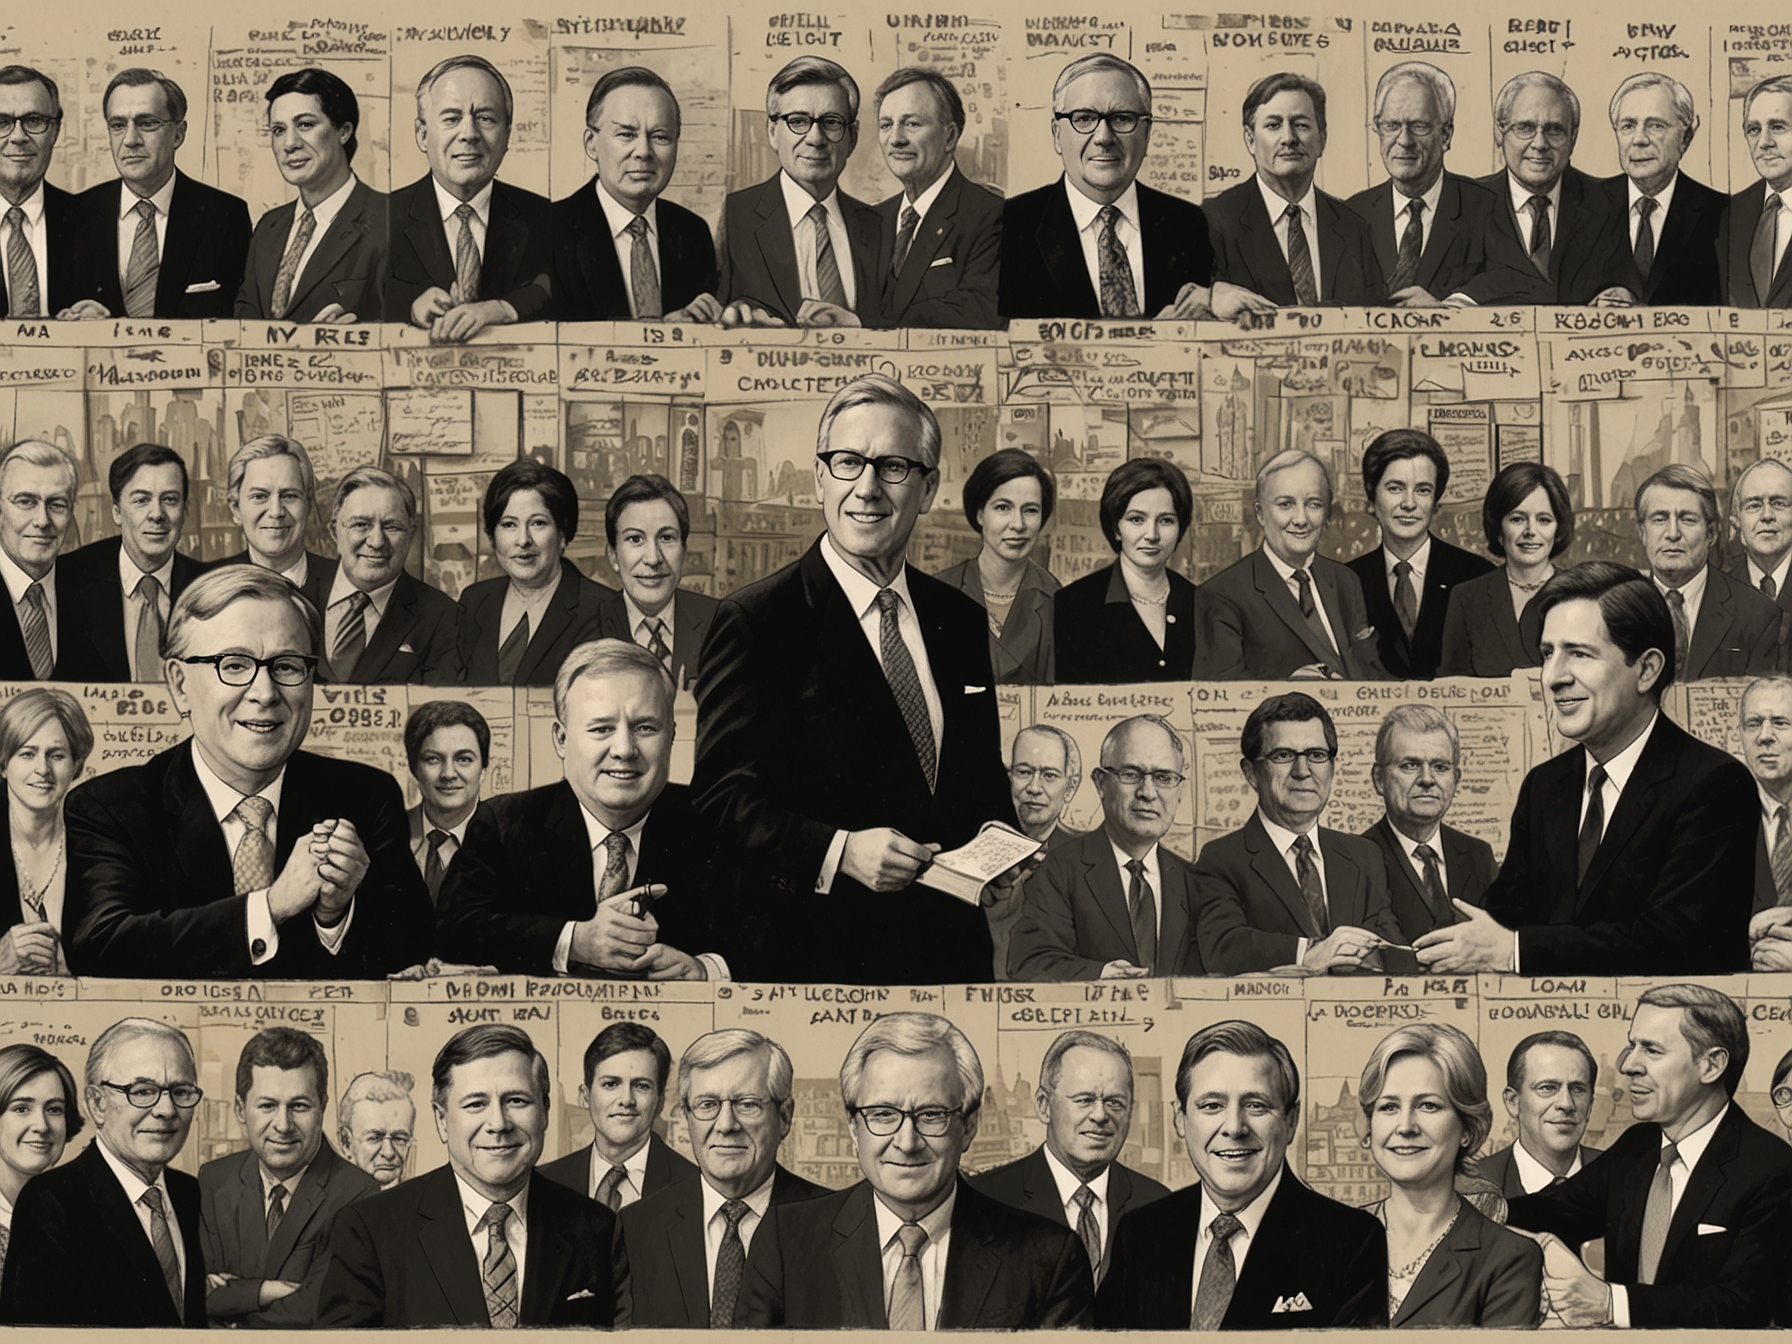 A collage showing notable moments from John McKay's political career, including his work on the Federal Sustainable Development Act and interactions with fellow MPs.